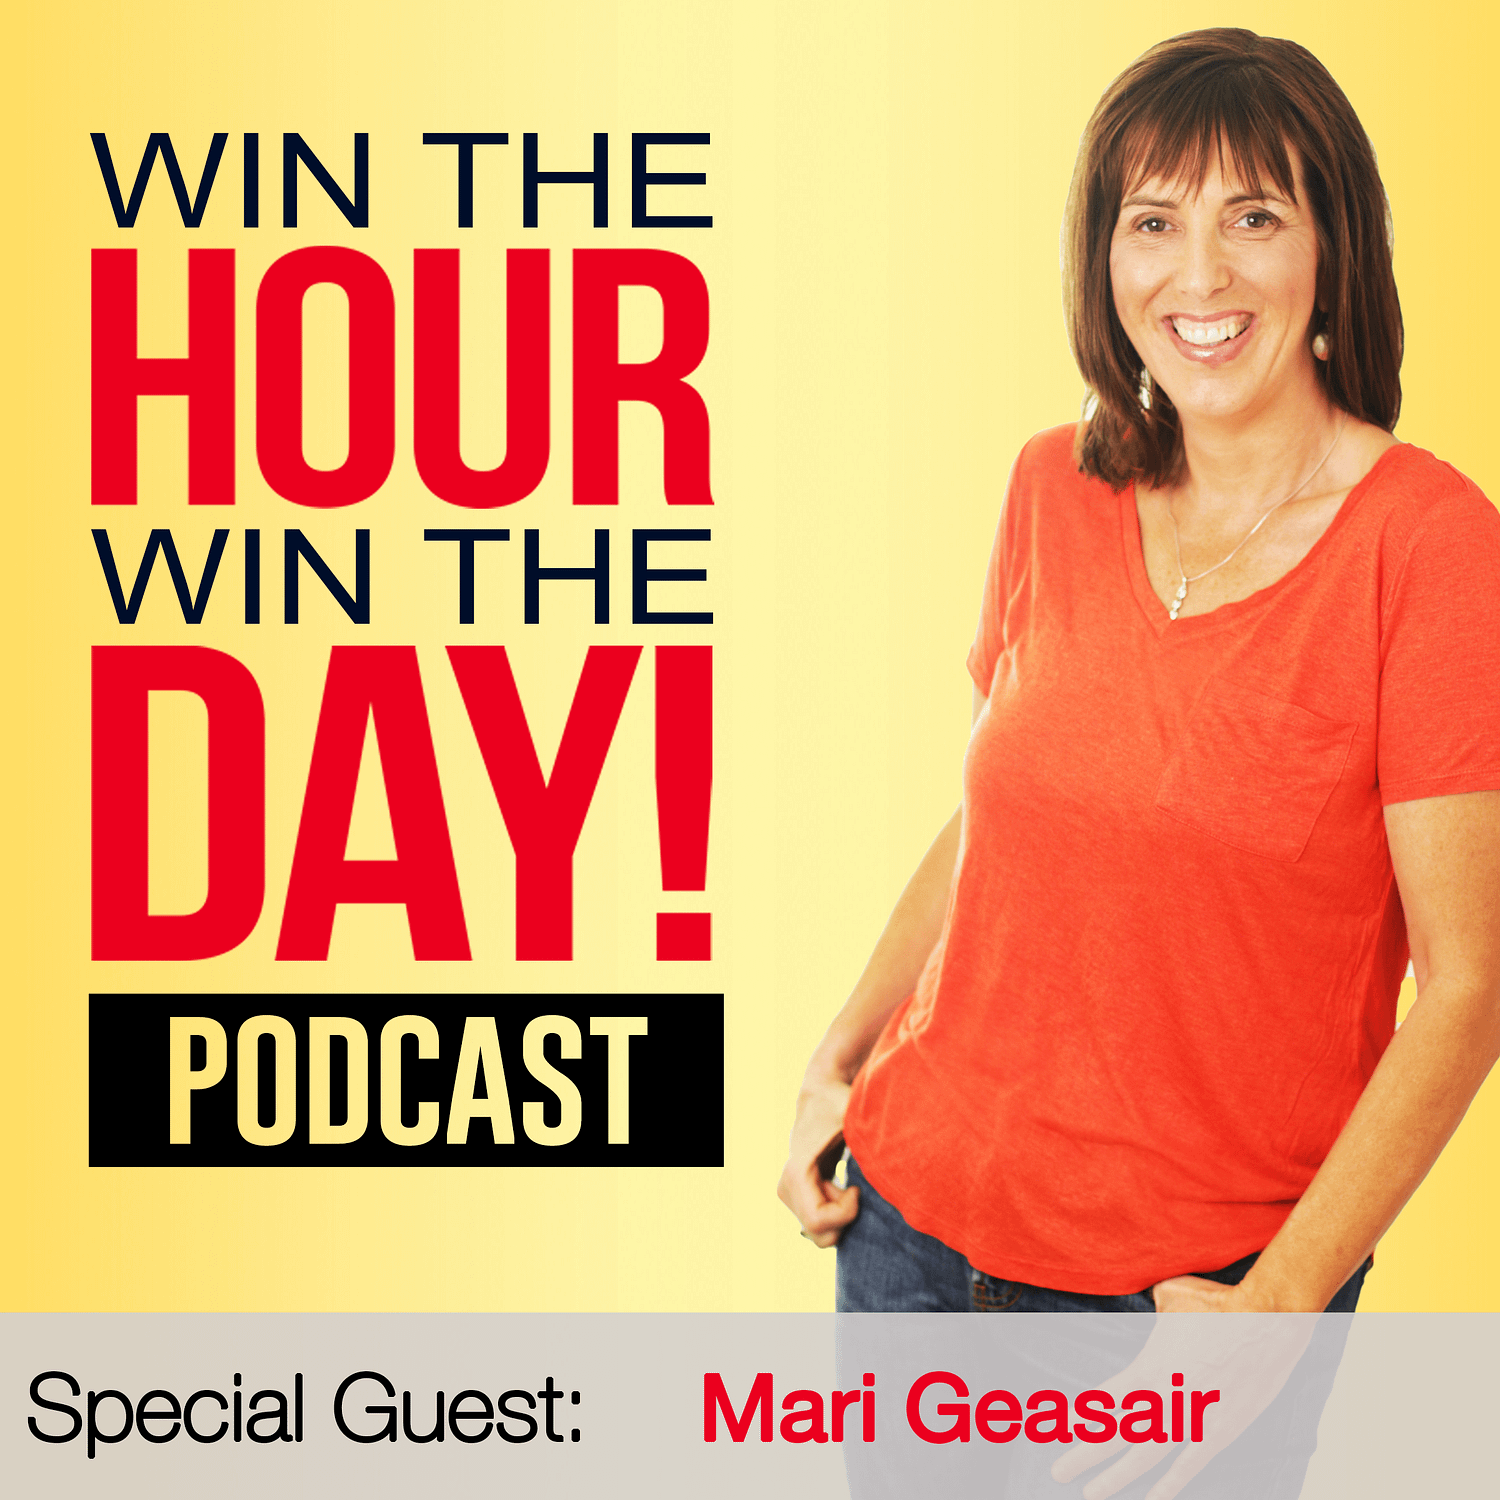 Video Marketing Strategy That Can Up Your Game! With Mari Geasair